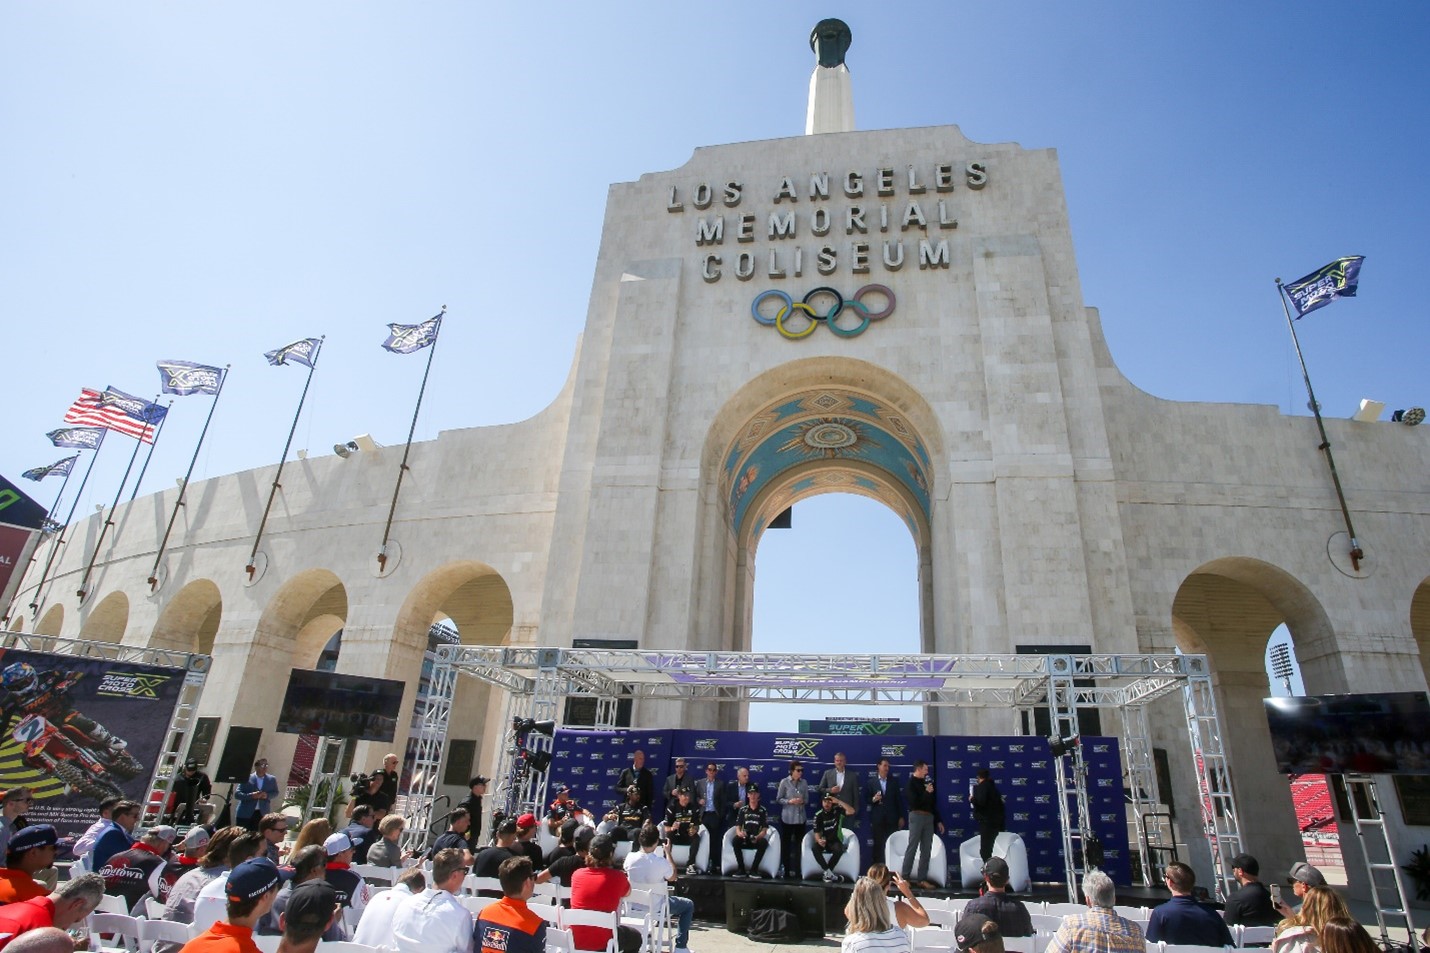 The Los Angeles Memorial Coliseum, long credited as the birthplace of Supercross, provided the perfect backdrop to discuss the future of the sport. The SuperMotocross World Championship Final will take place at the venue on October 14, 2023. Photo Credit: Feld Motor Sports 